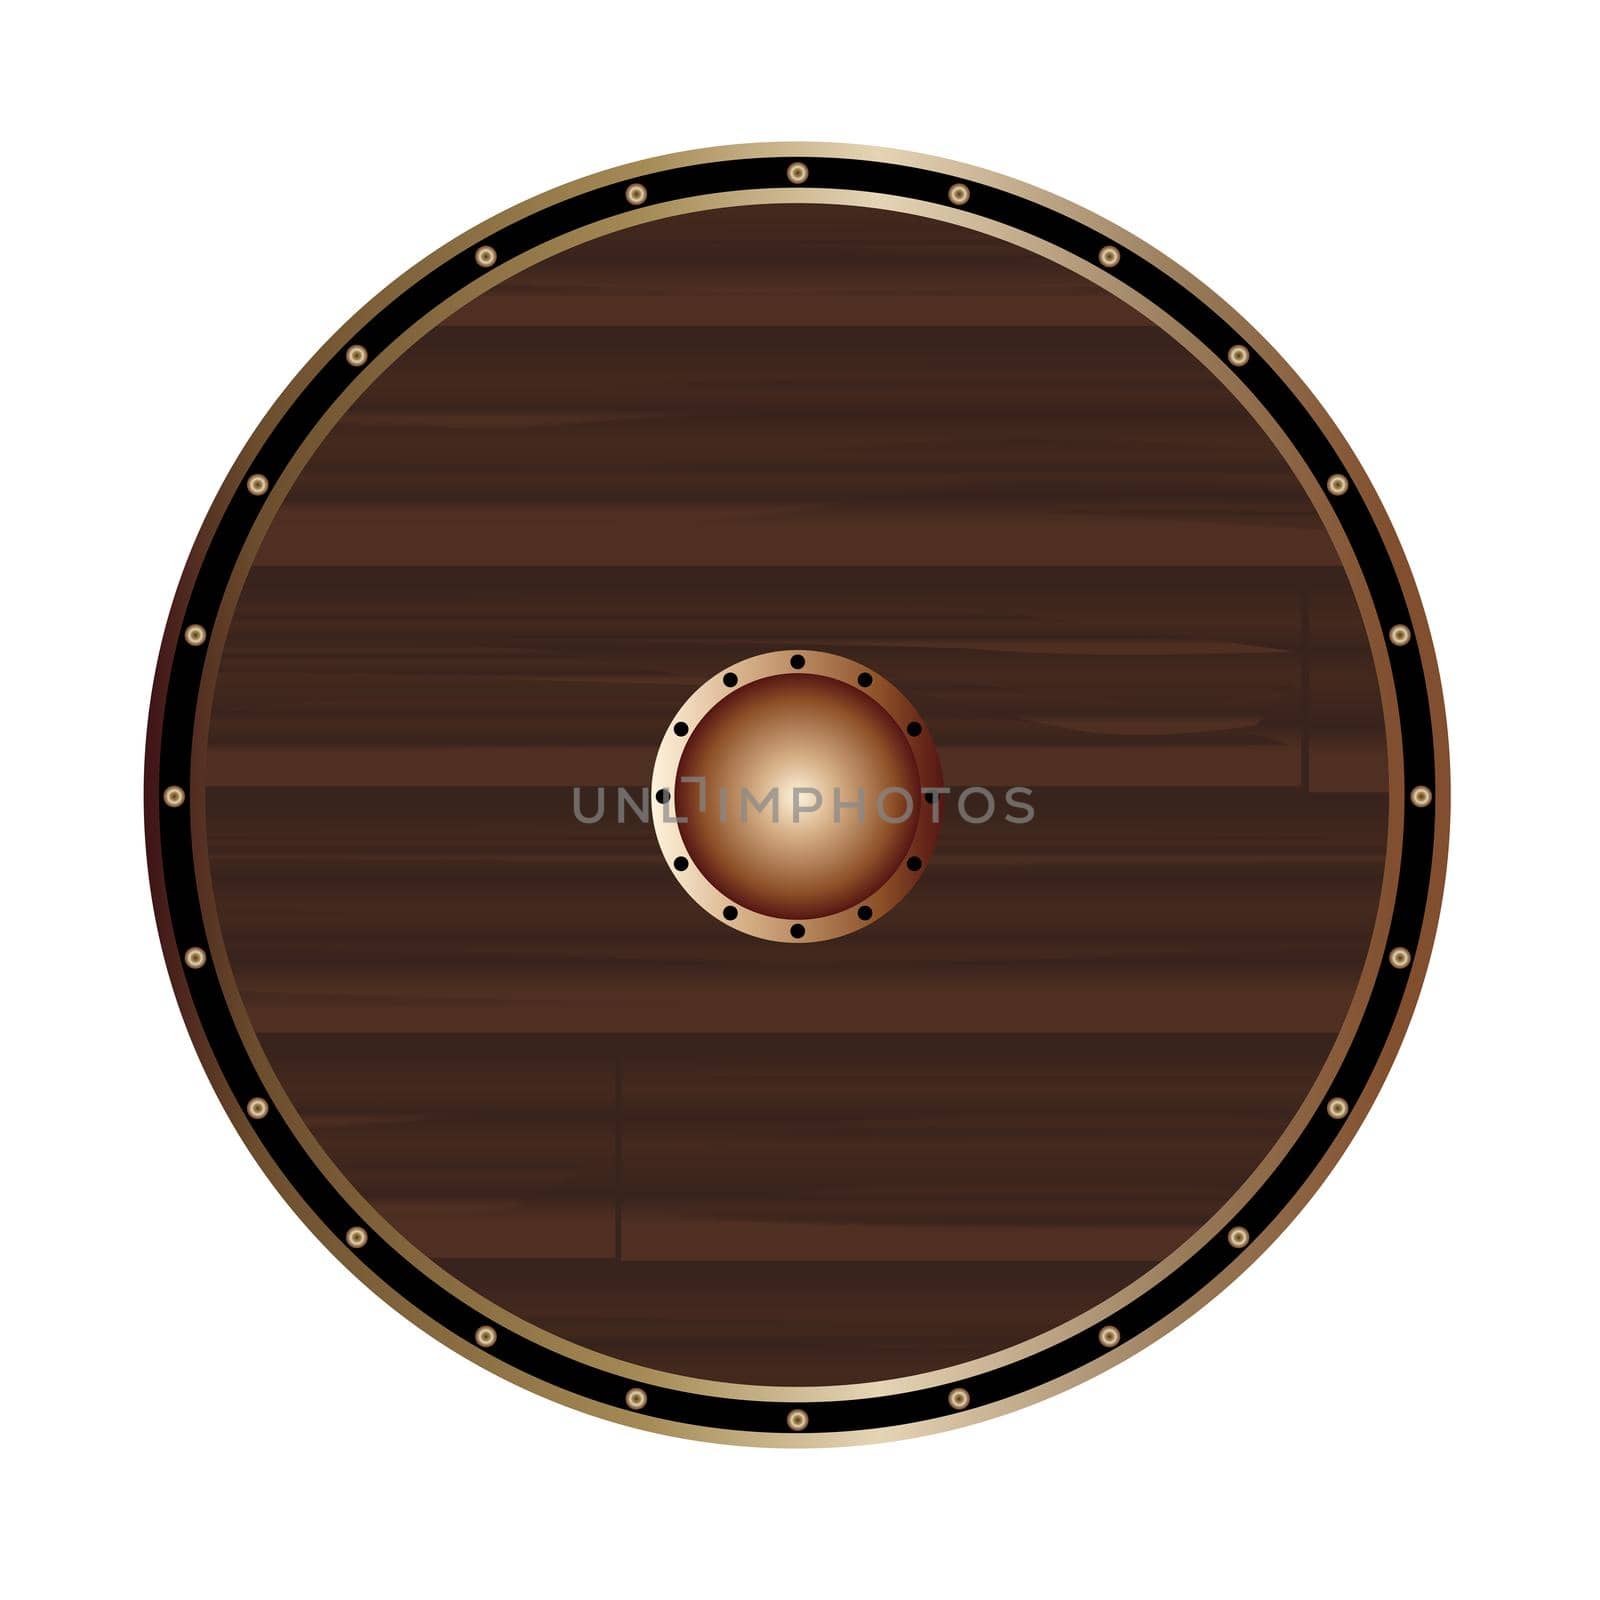 A typical round Viking shield on a white background